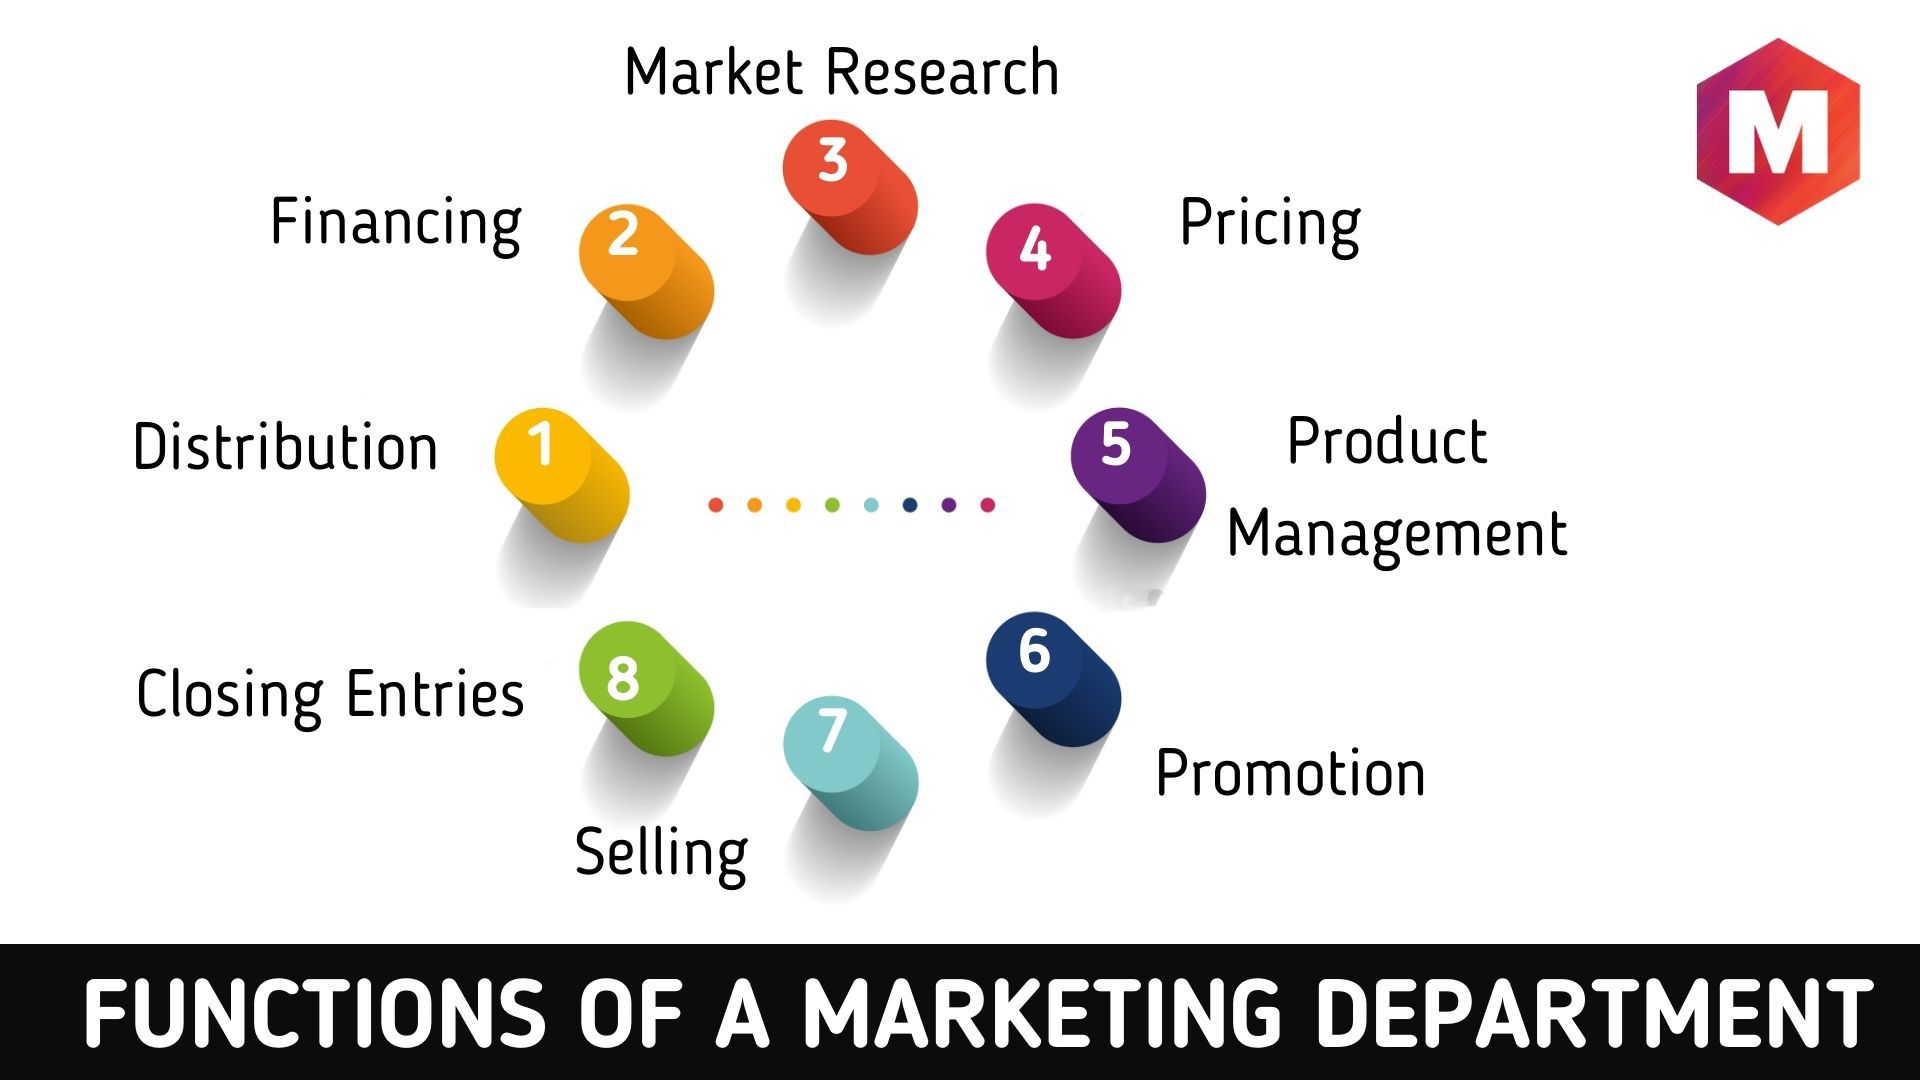 Functions of a Marketing Department